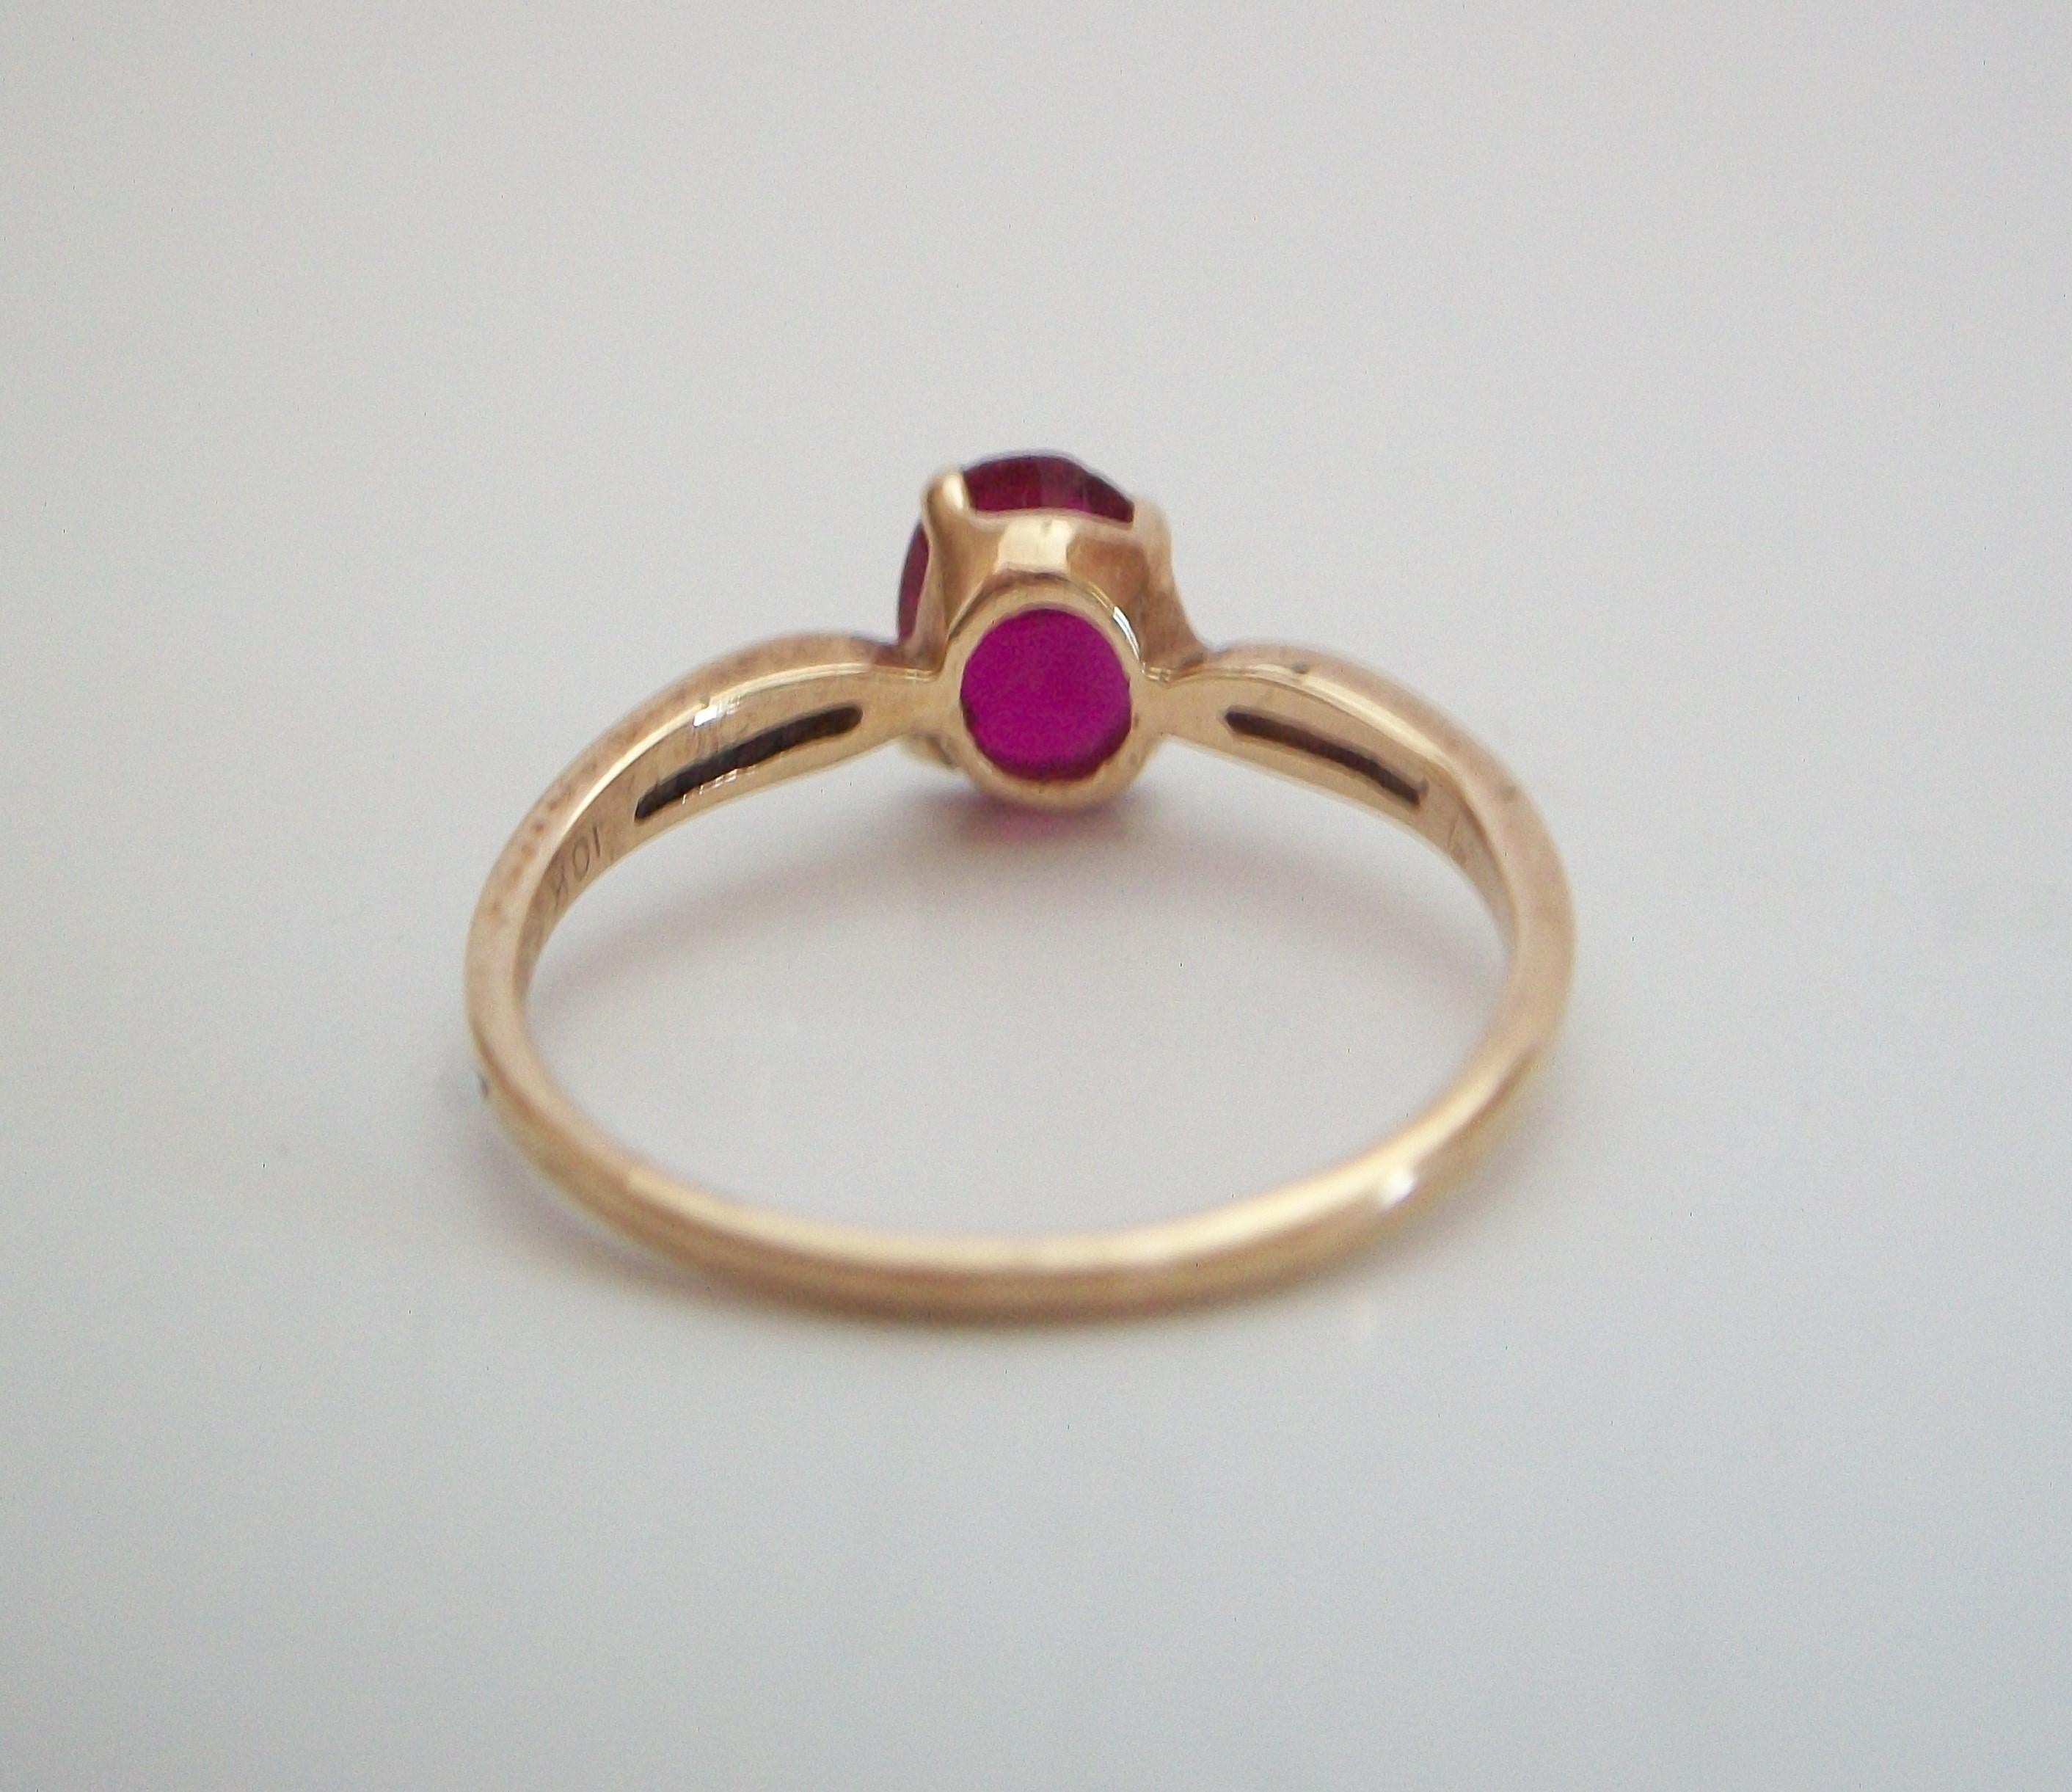 Oval Cut Vintage Red Topaz & 10K Yellow Gold Ring - Size 5.5 - U.S.A. - Circa 1980's For Sale